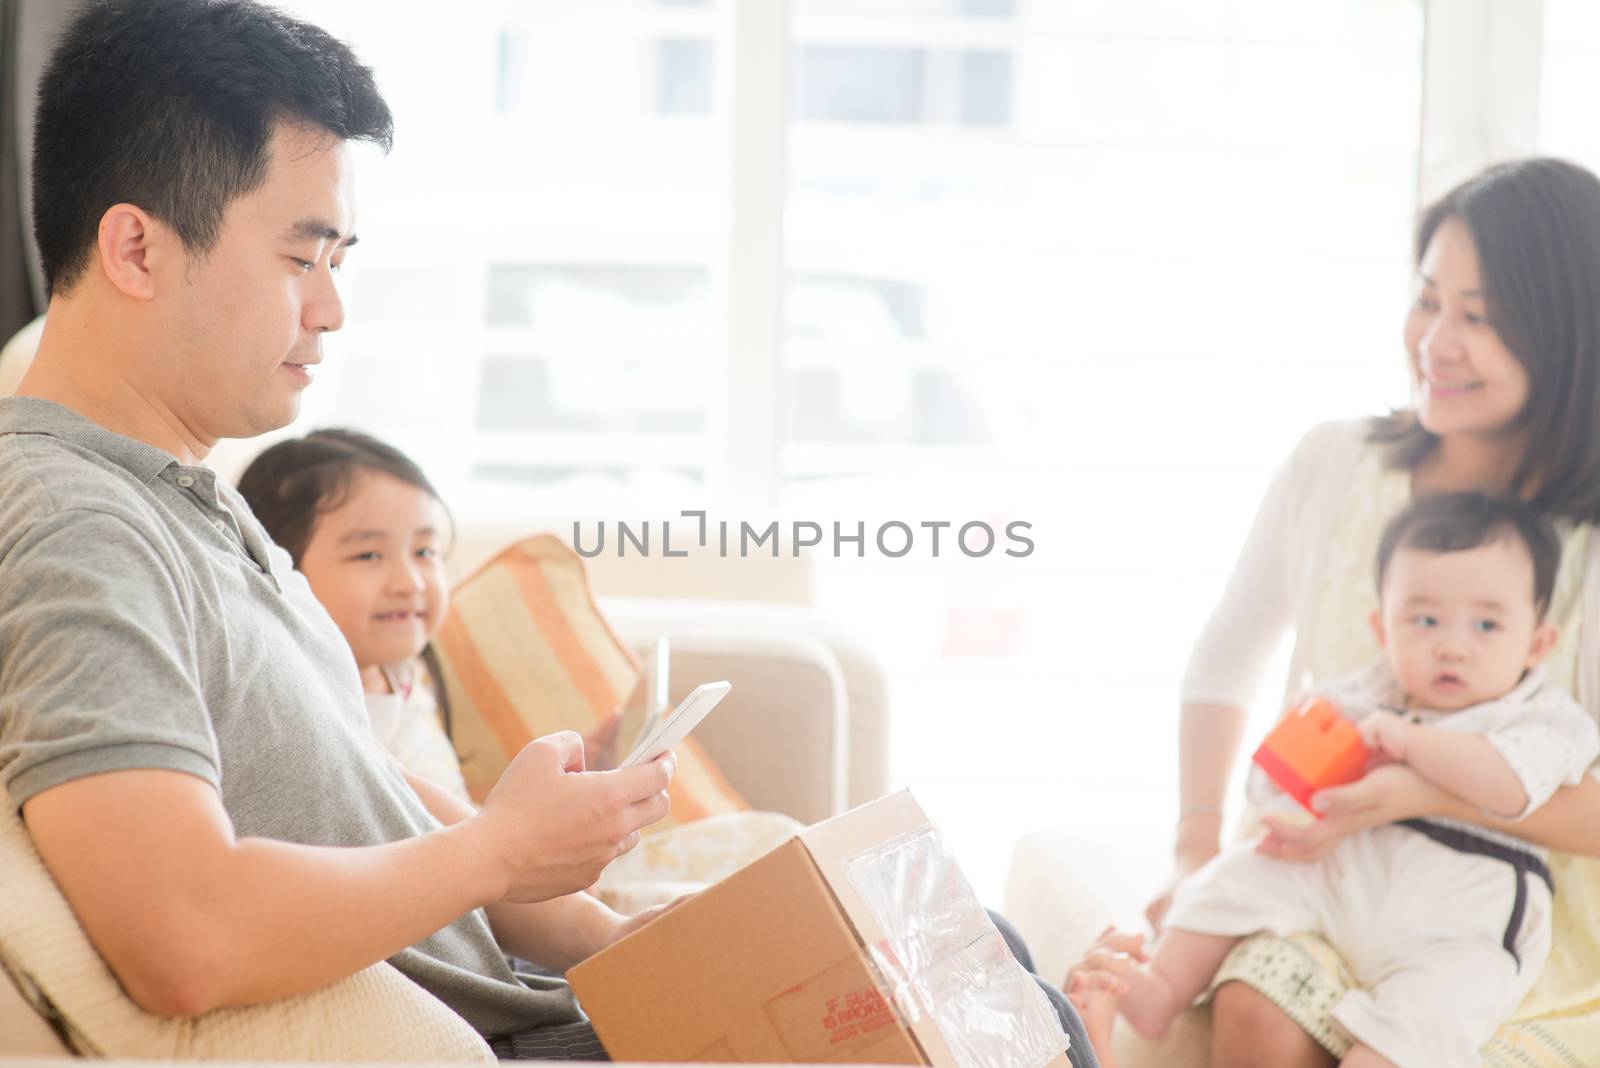 Chinese man scanning QR code with smart phone. Happy Asian family at home, natural living lifestyle indoors.